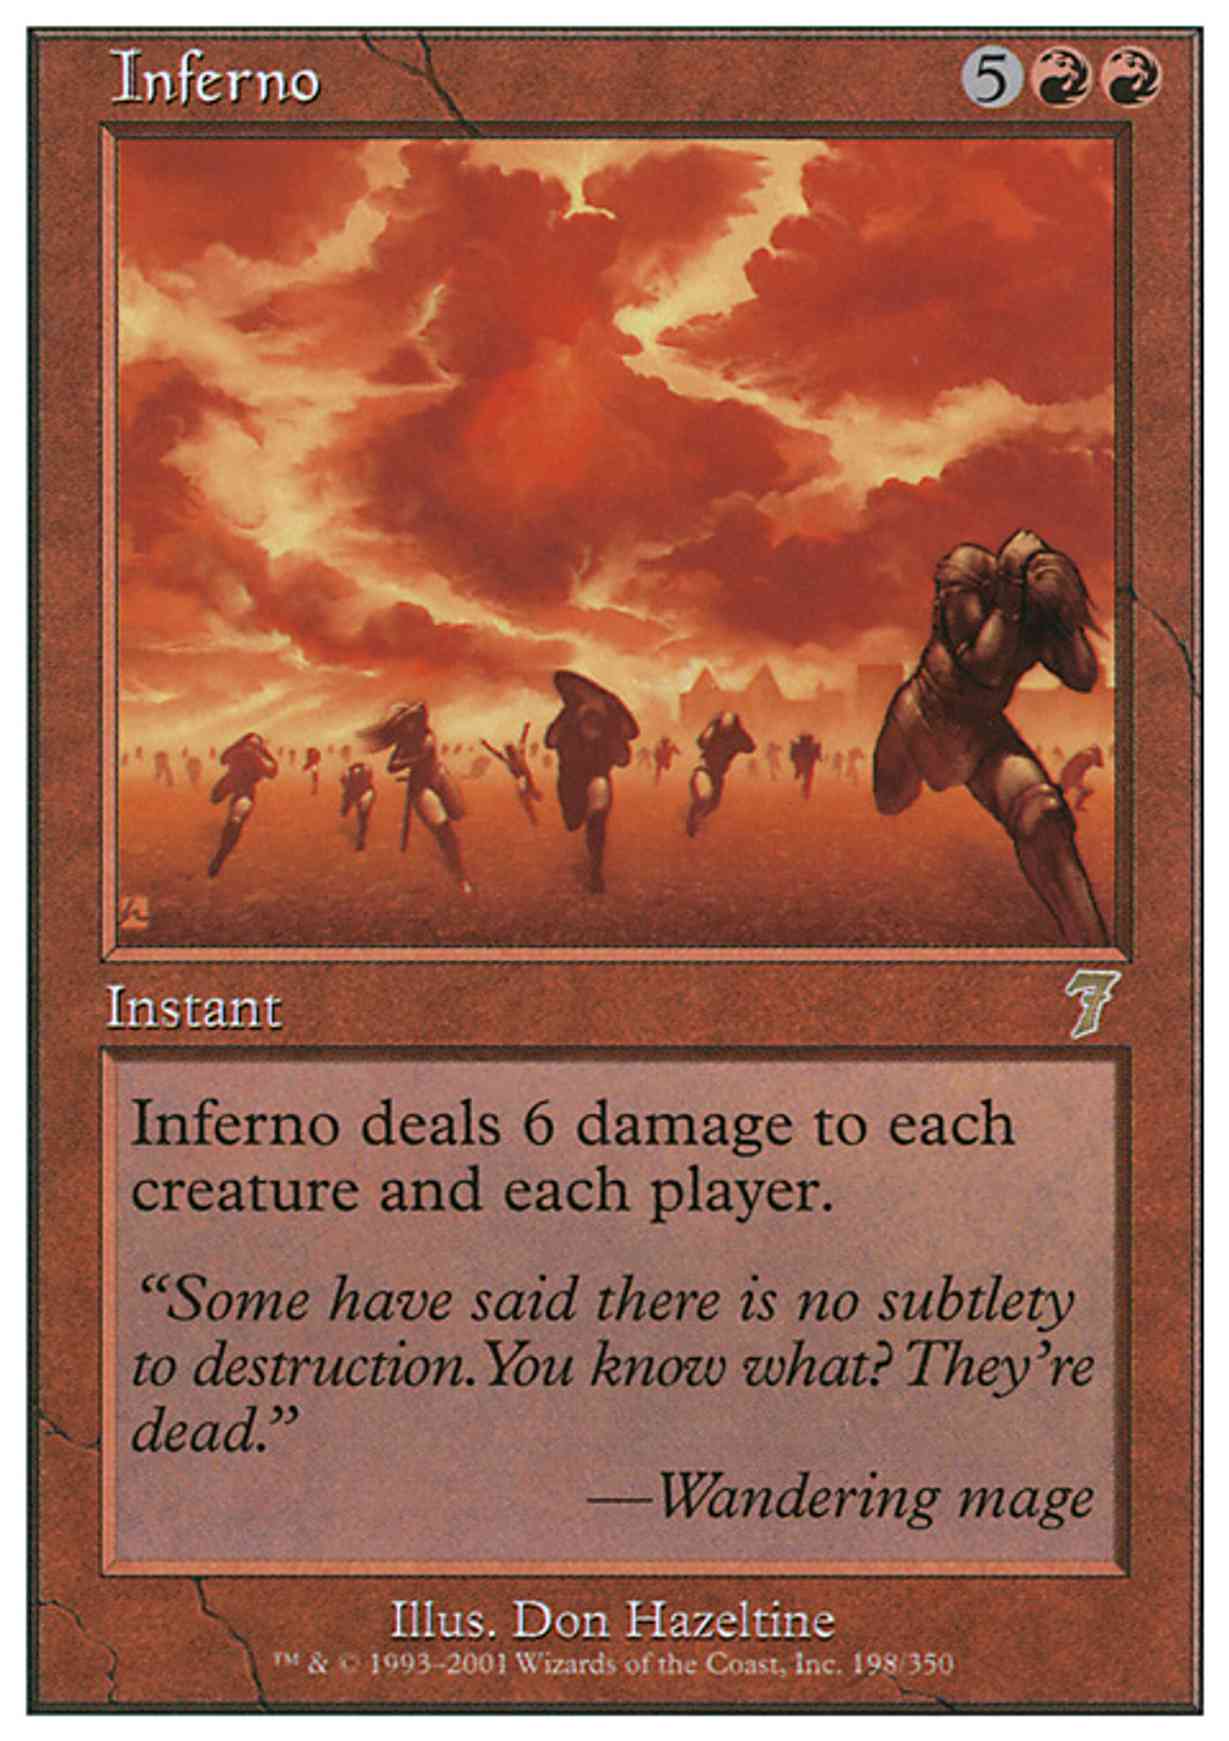 Inferno magic card front